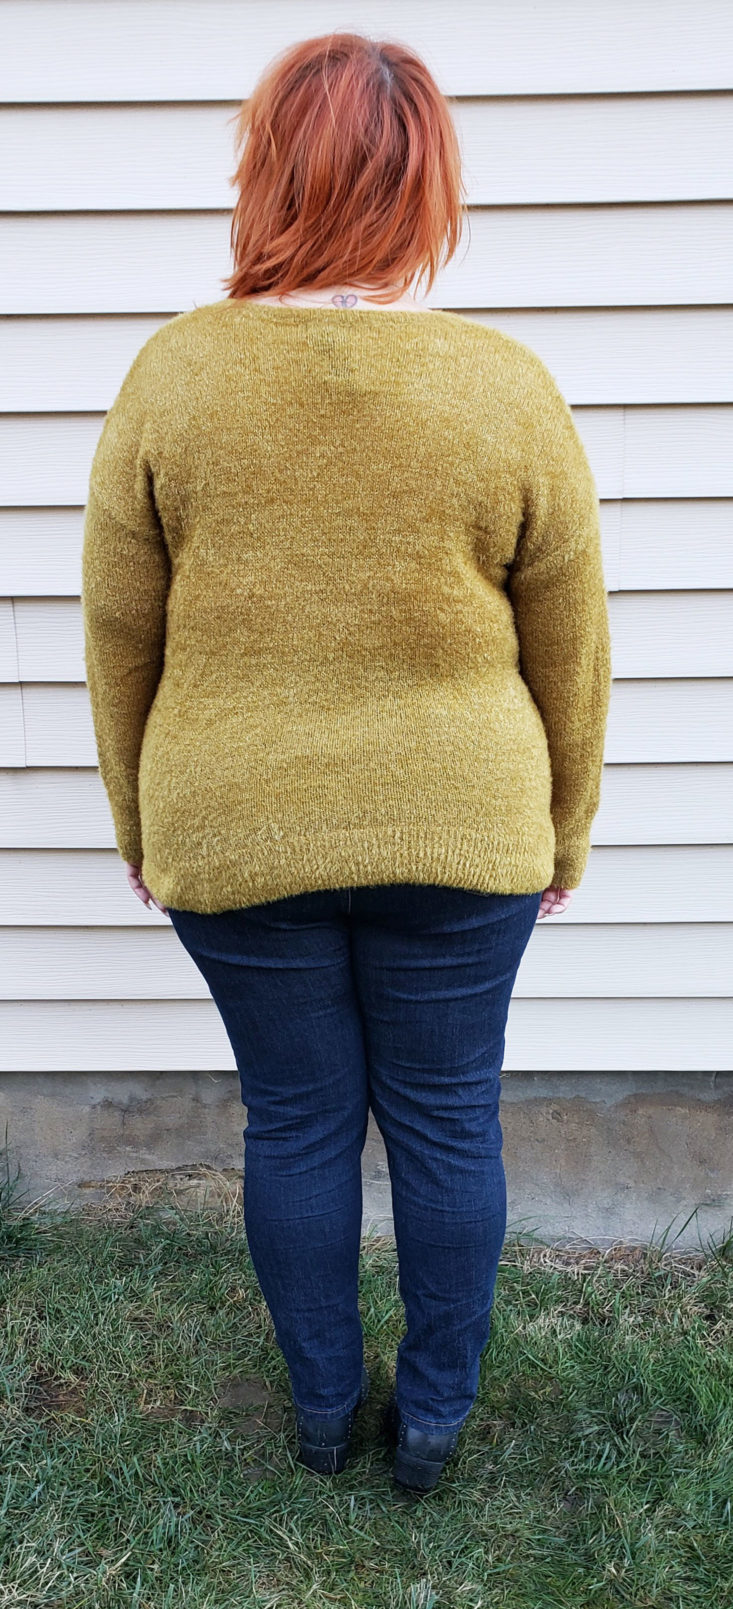 Trunk Club Plus Size Subscription Box Review November 2018 - Fuzzy V-Neck Sweater in Olive Amber by Halogen 4 Back